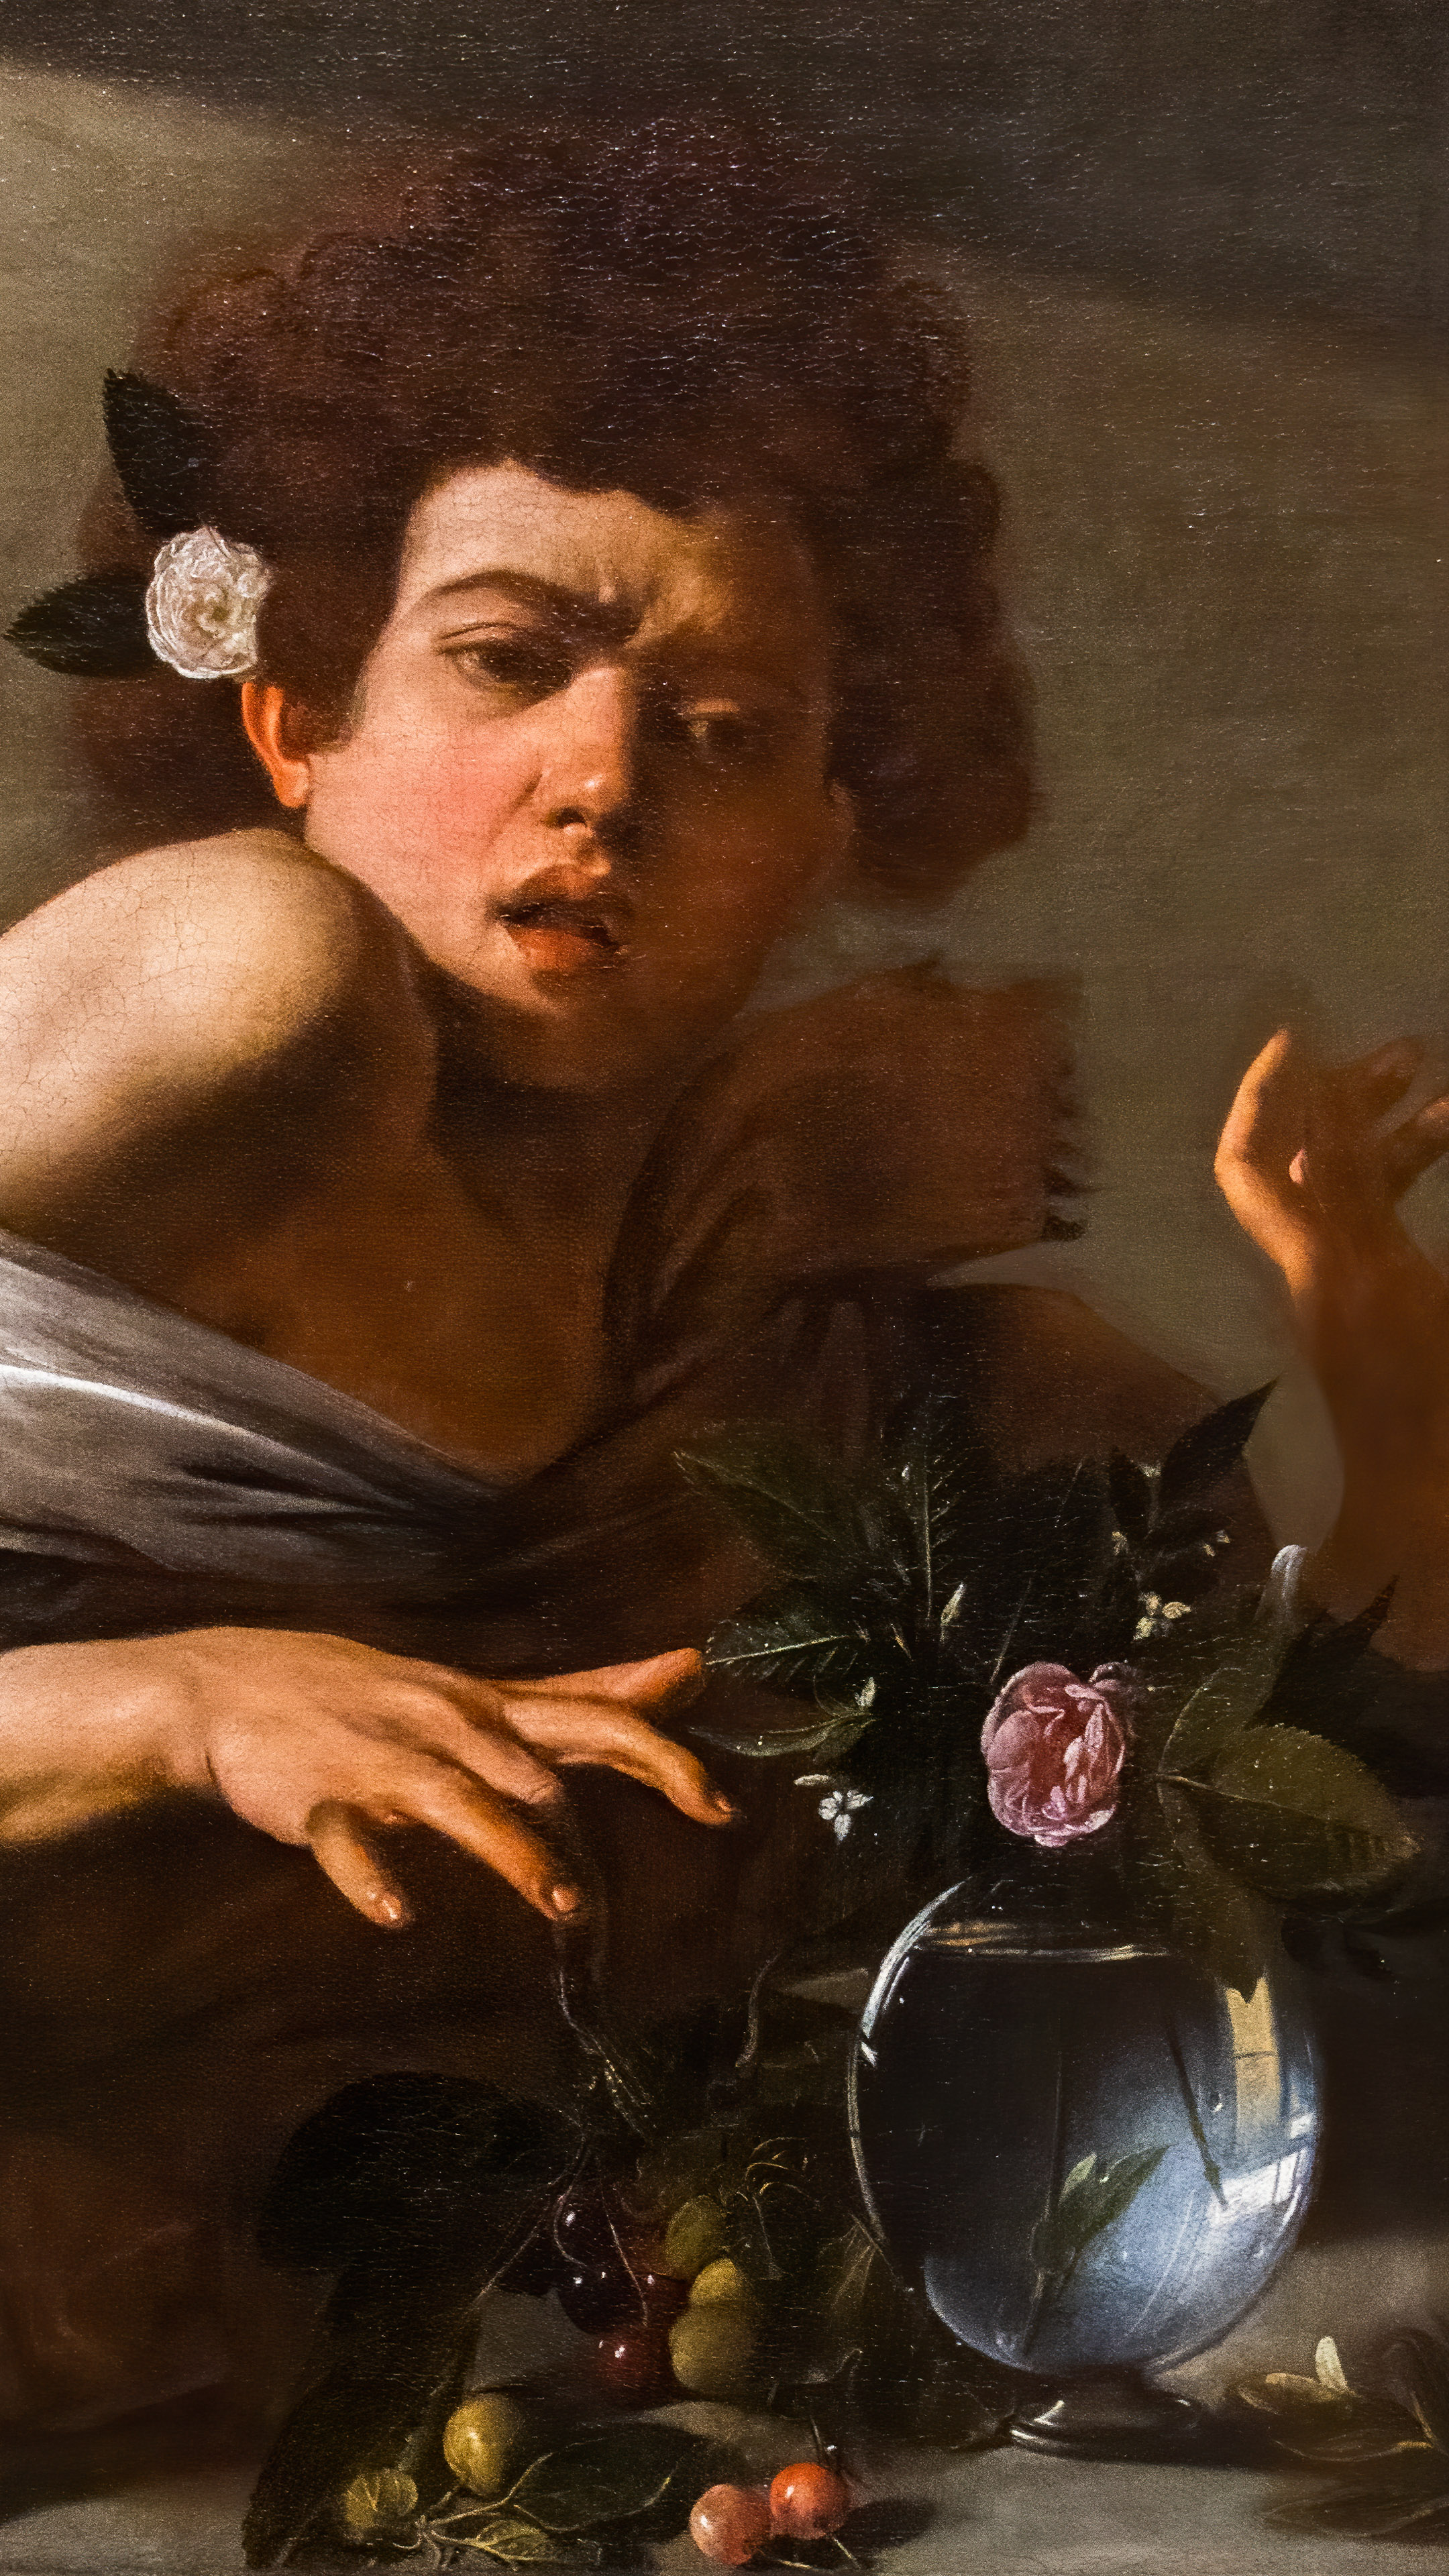 iphone painting wallpaper of Caravaggio in 4K Ultra HD resolution